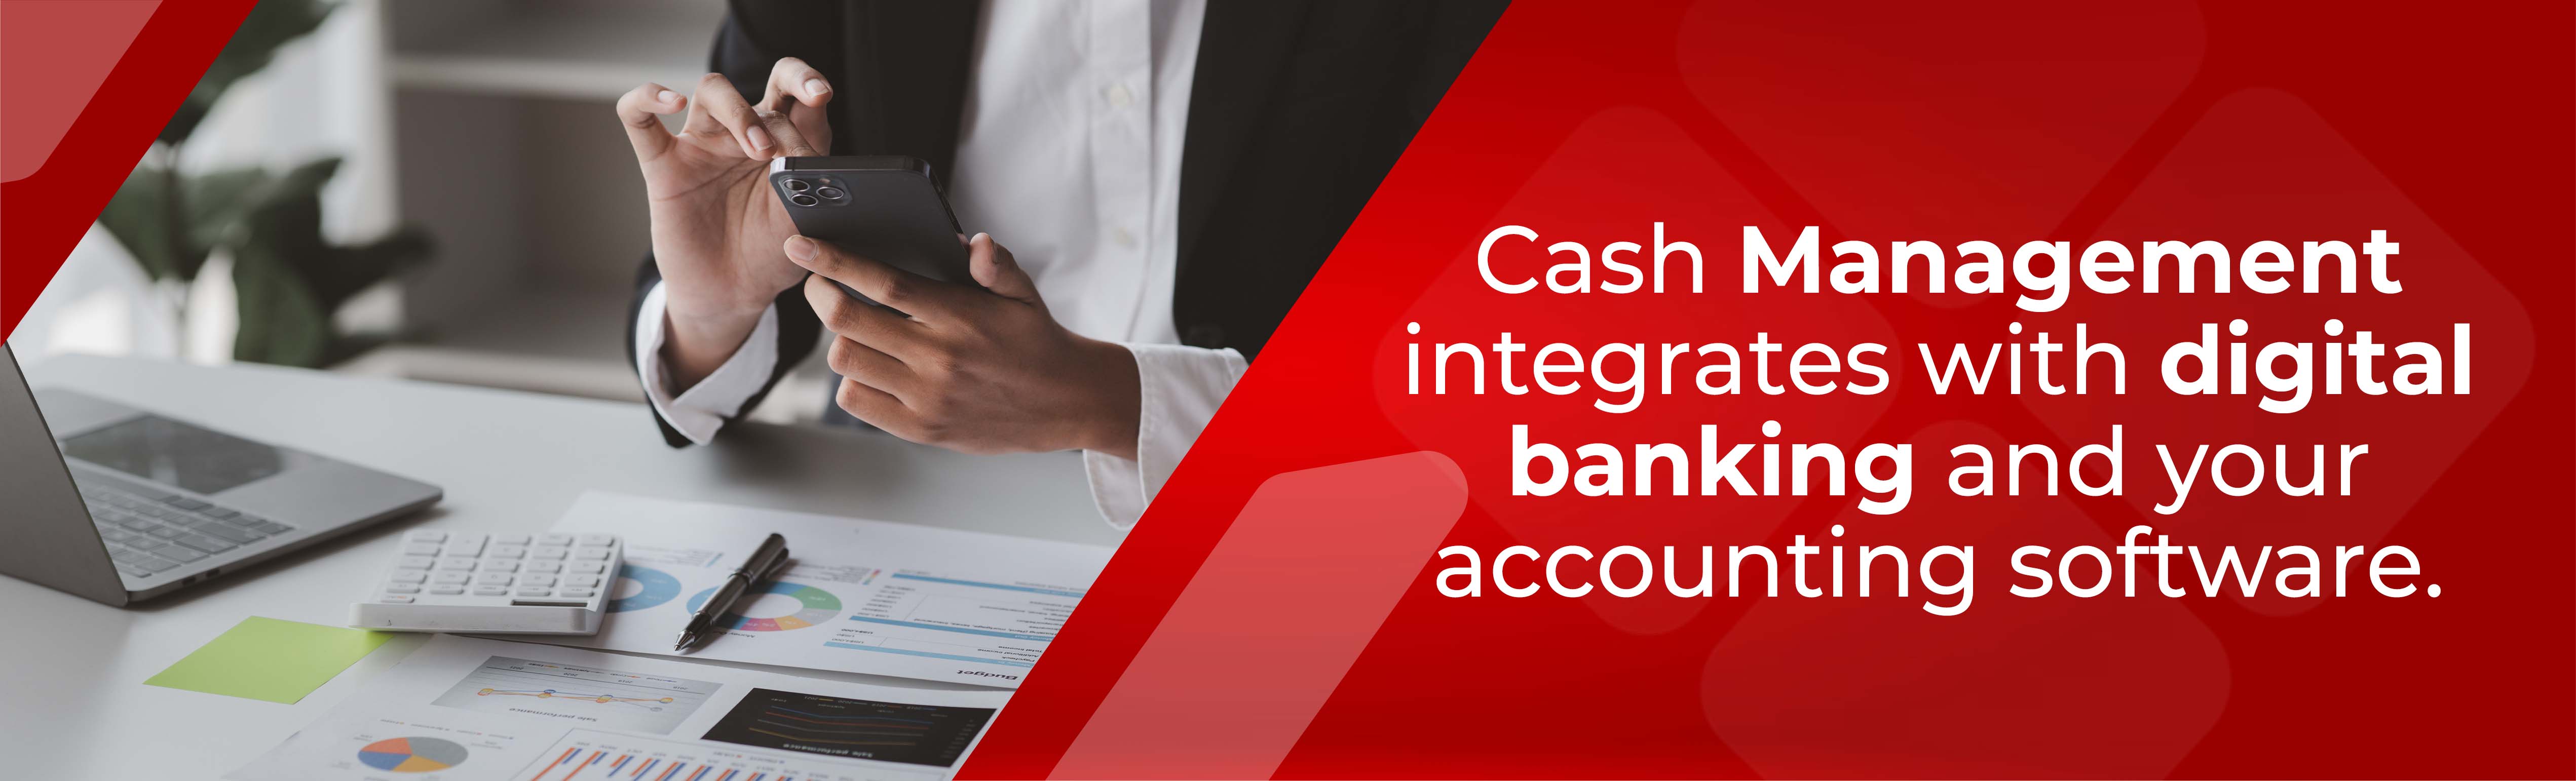 Cash Management integrates with digital banking and your accounting software - Person looking at mobile phone in front of laptop, calculator and reports